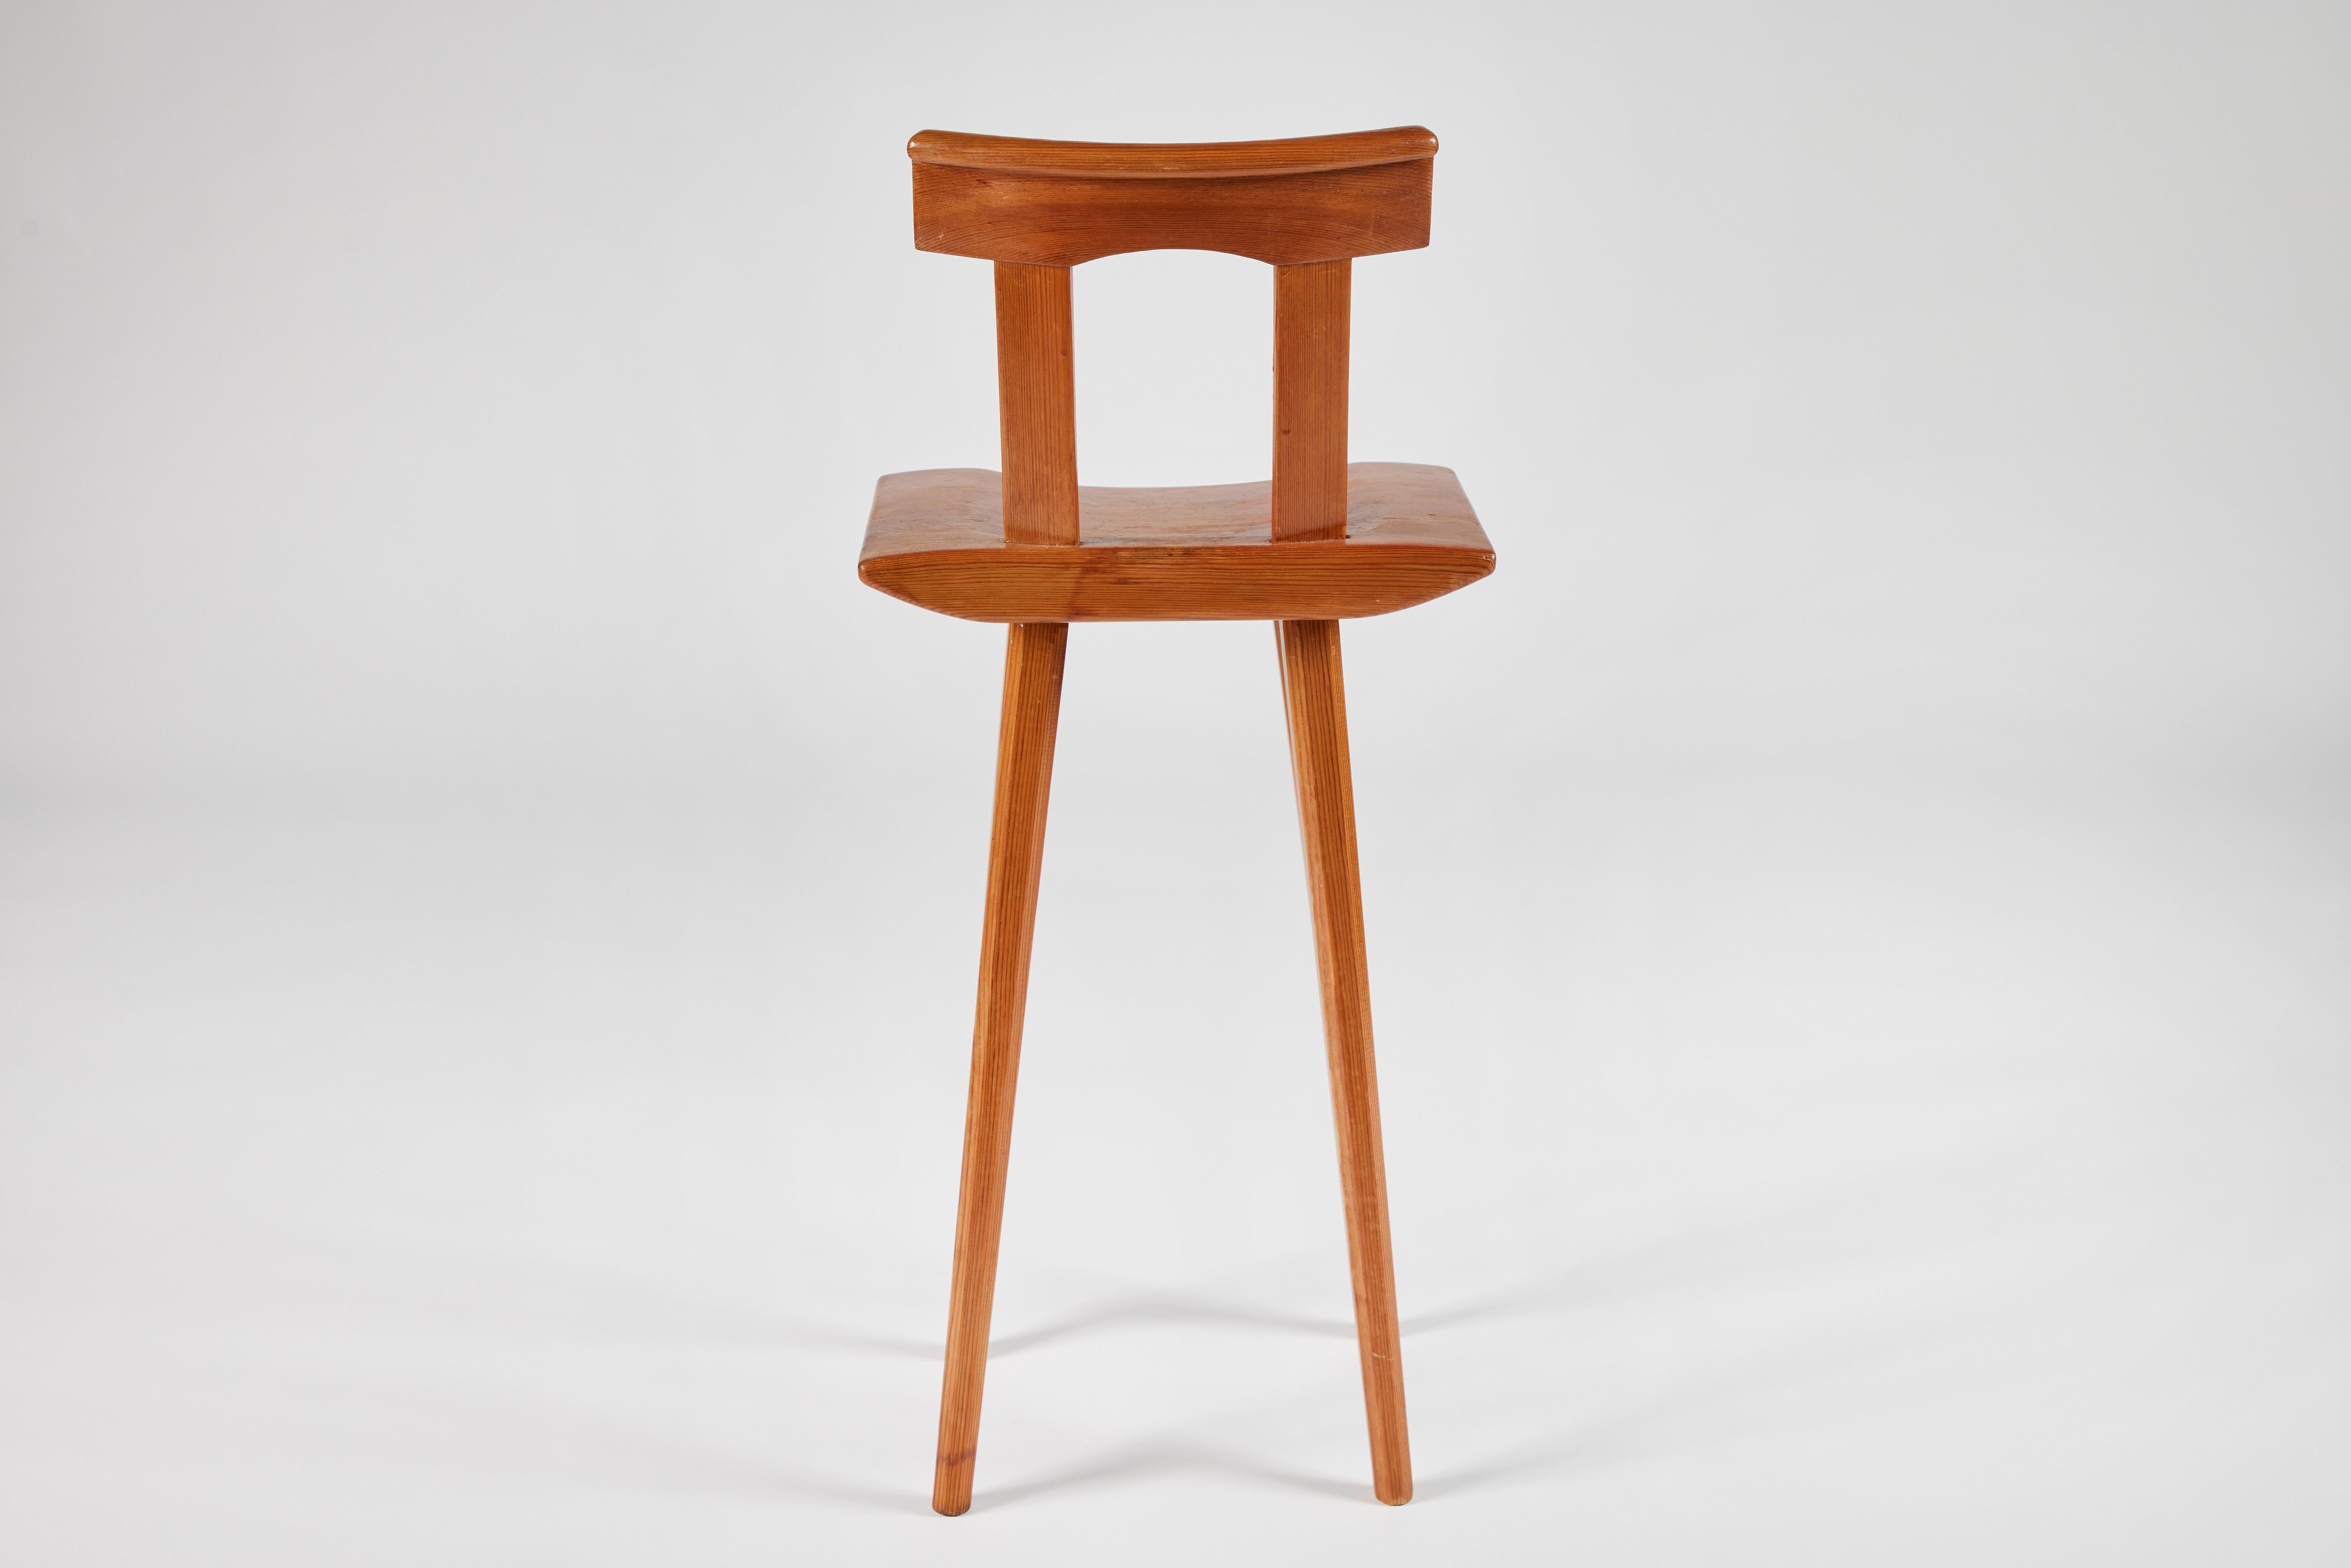 Pine Midcentury Swedish Child's High Chair or Stool by Bengt Lundgren For Sale